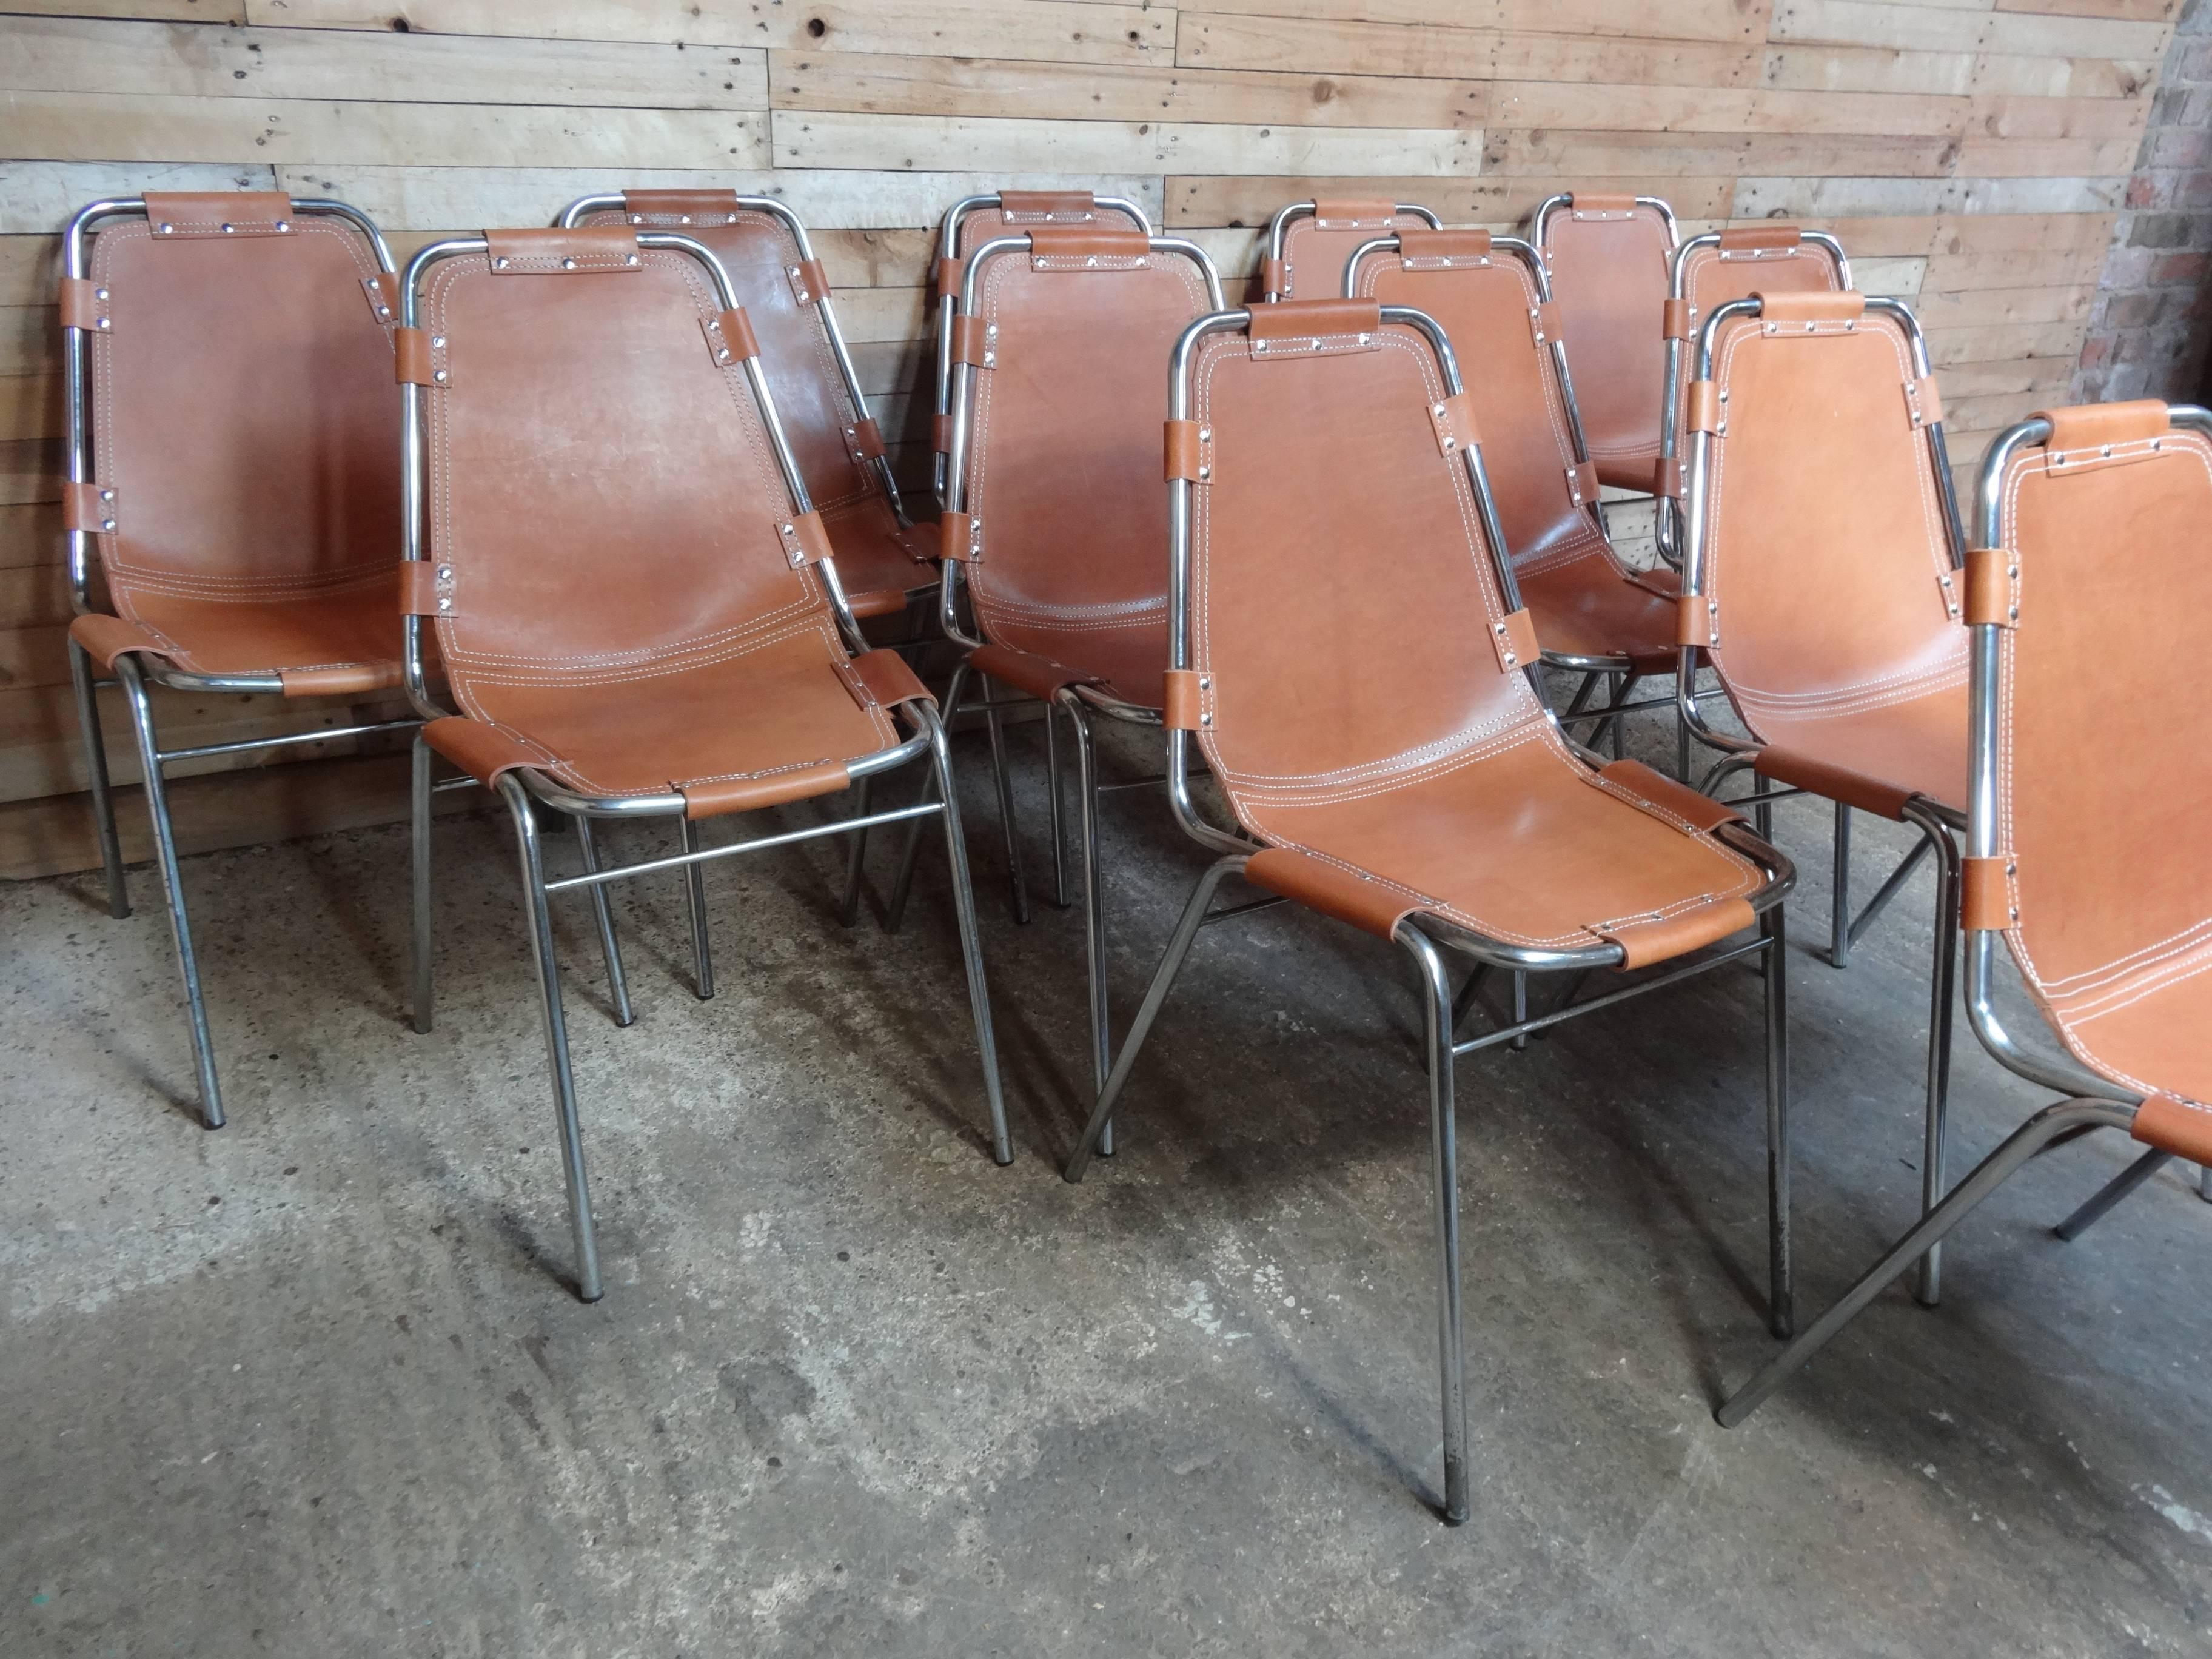 Stunning set of chairs, you will not find another set of 12 chairs like this one on any web site worldwide! Selected by Charlotte Perriand for Les Arcs Ski Resort, circa 1960. Very nice chrome tubular frame with thick brown leather seats, which has